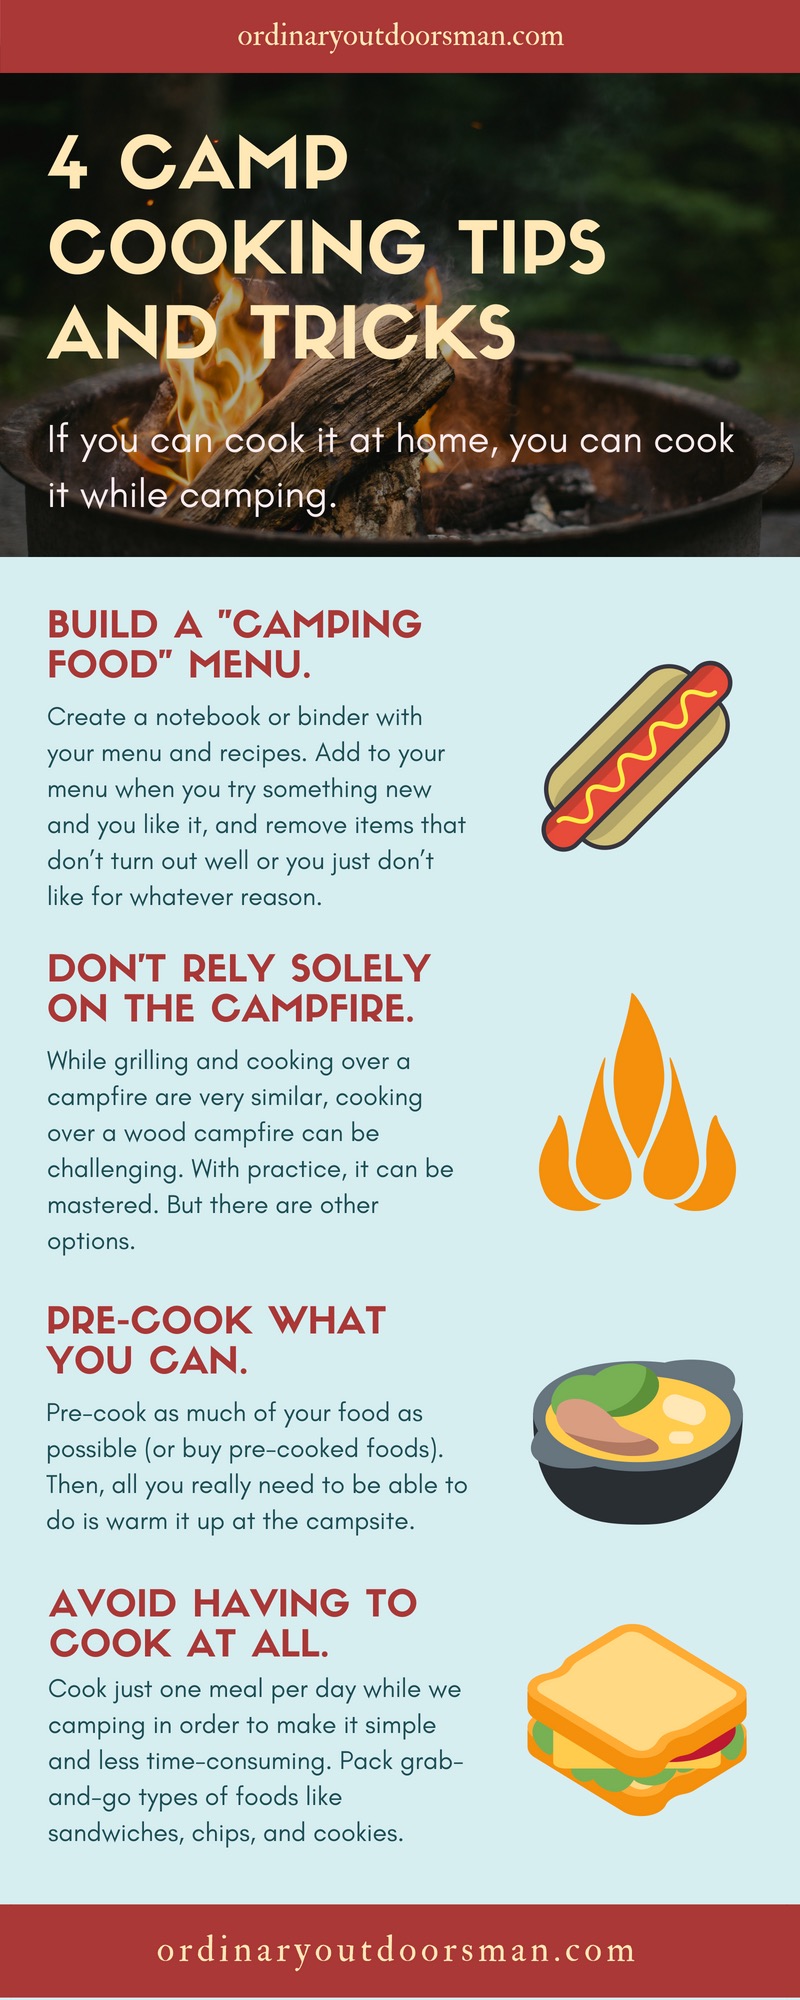 4-Camp-Cooking-tips-and-Tricks - Ordinary Outdoorsman